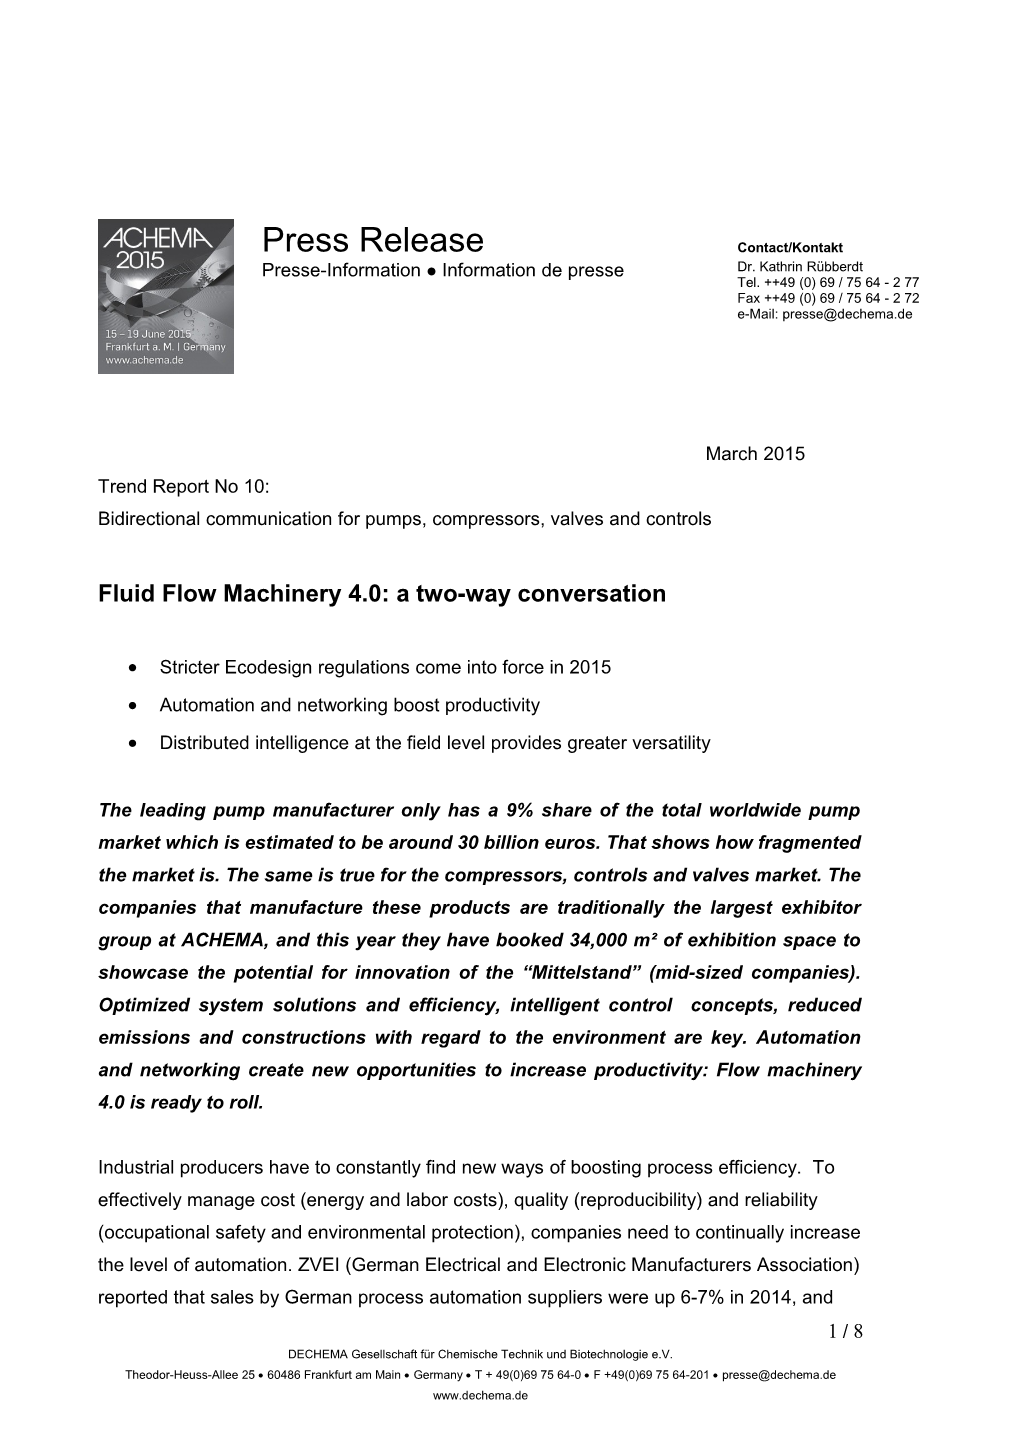 Fluid Flow Machinery 4.0: a Two-Way Conversation